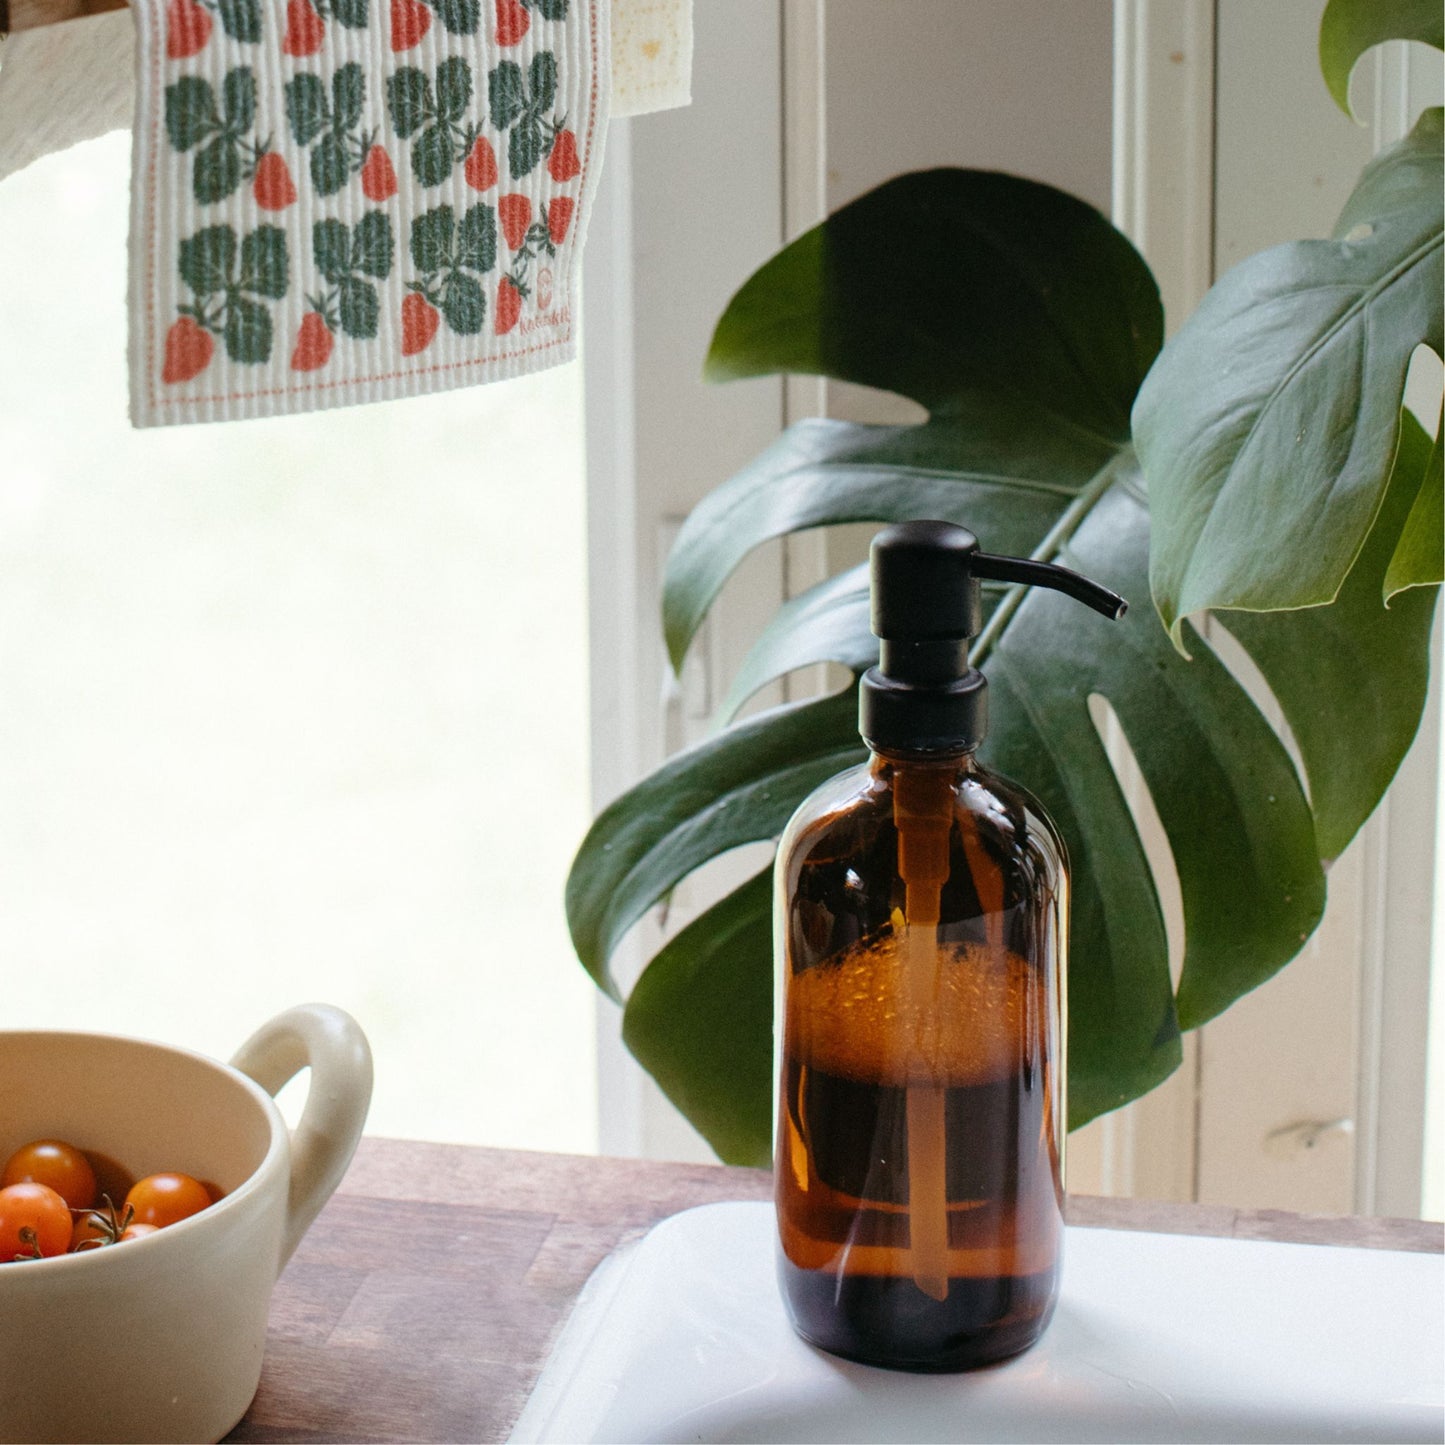 Reusable Amber Glass Soap Dispenser  with a bowl filled with tomatoes, a dishcloth placed above and a plant in the back